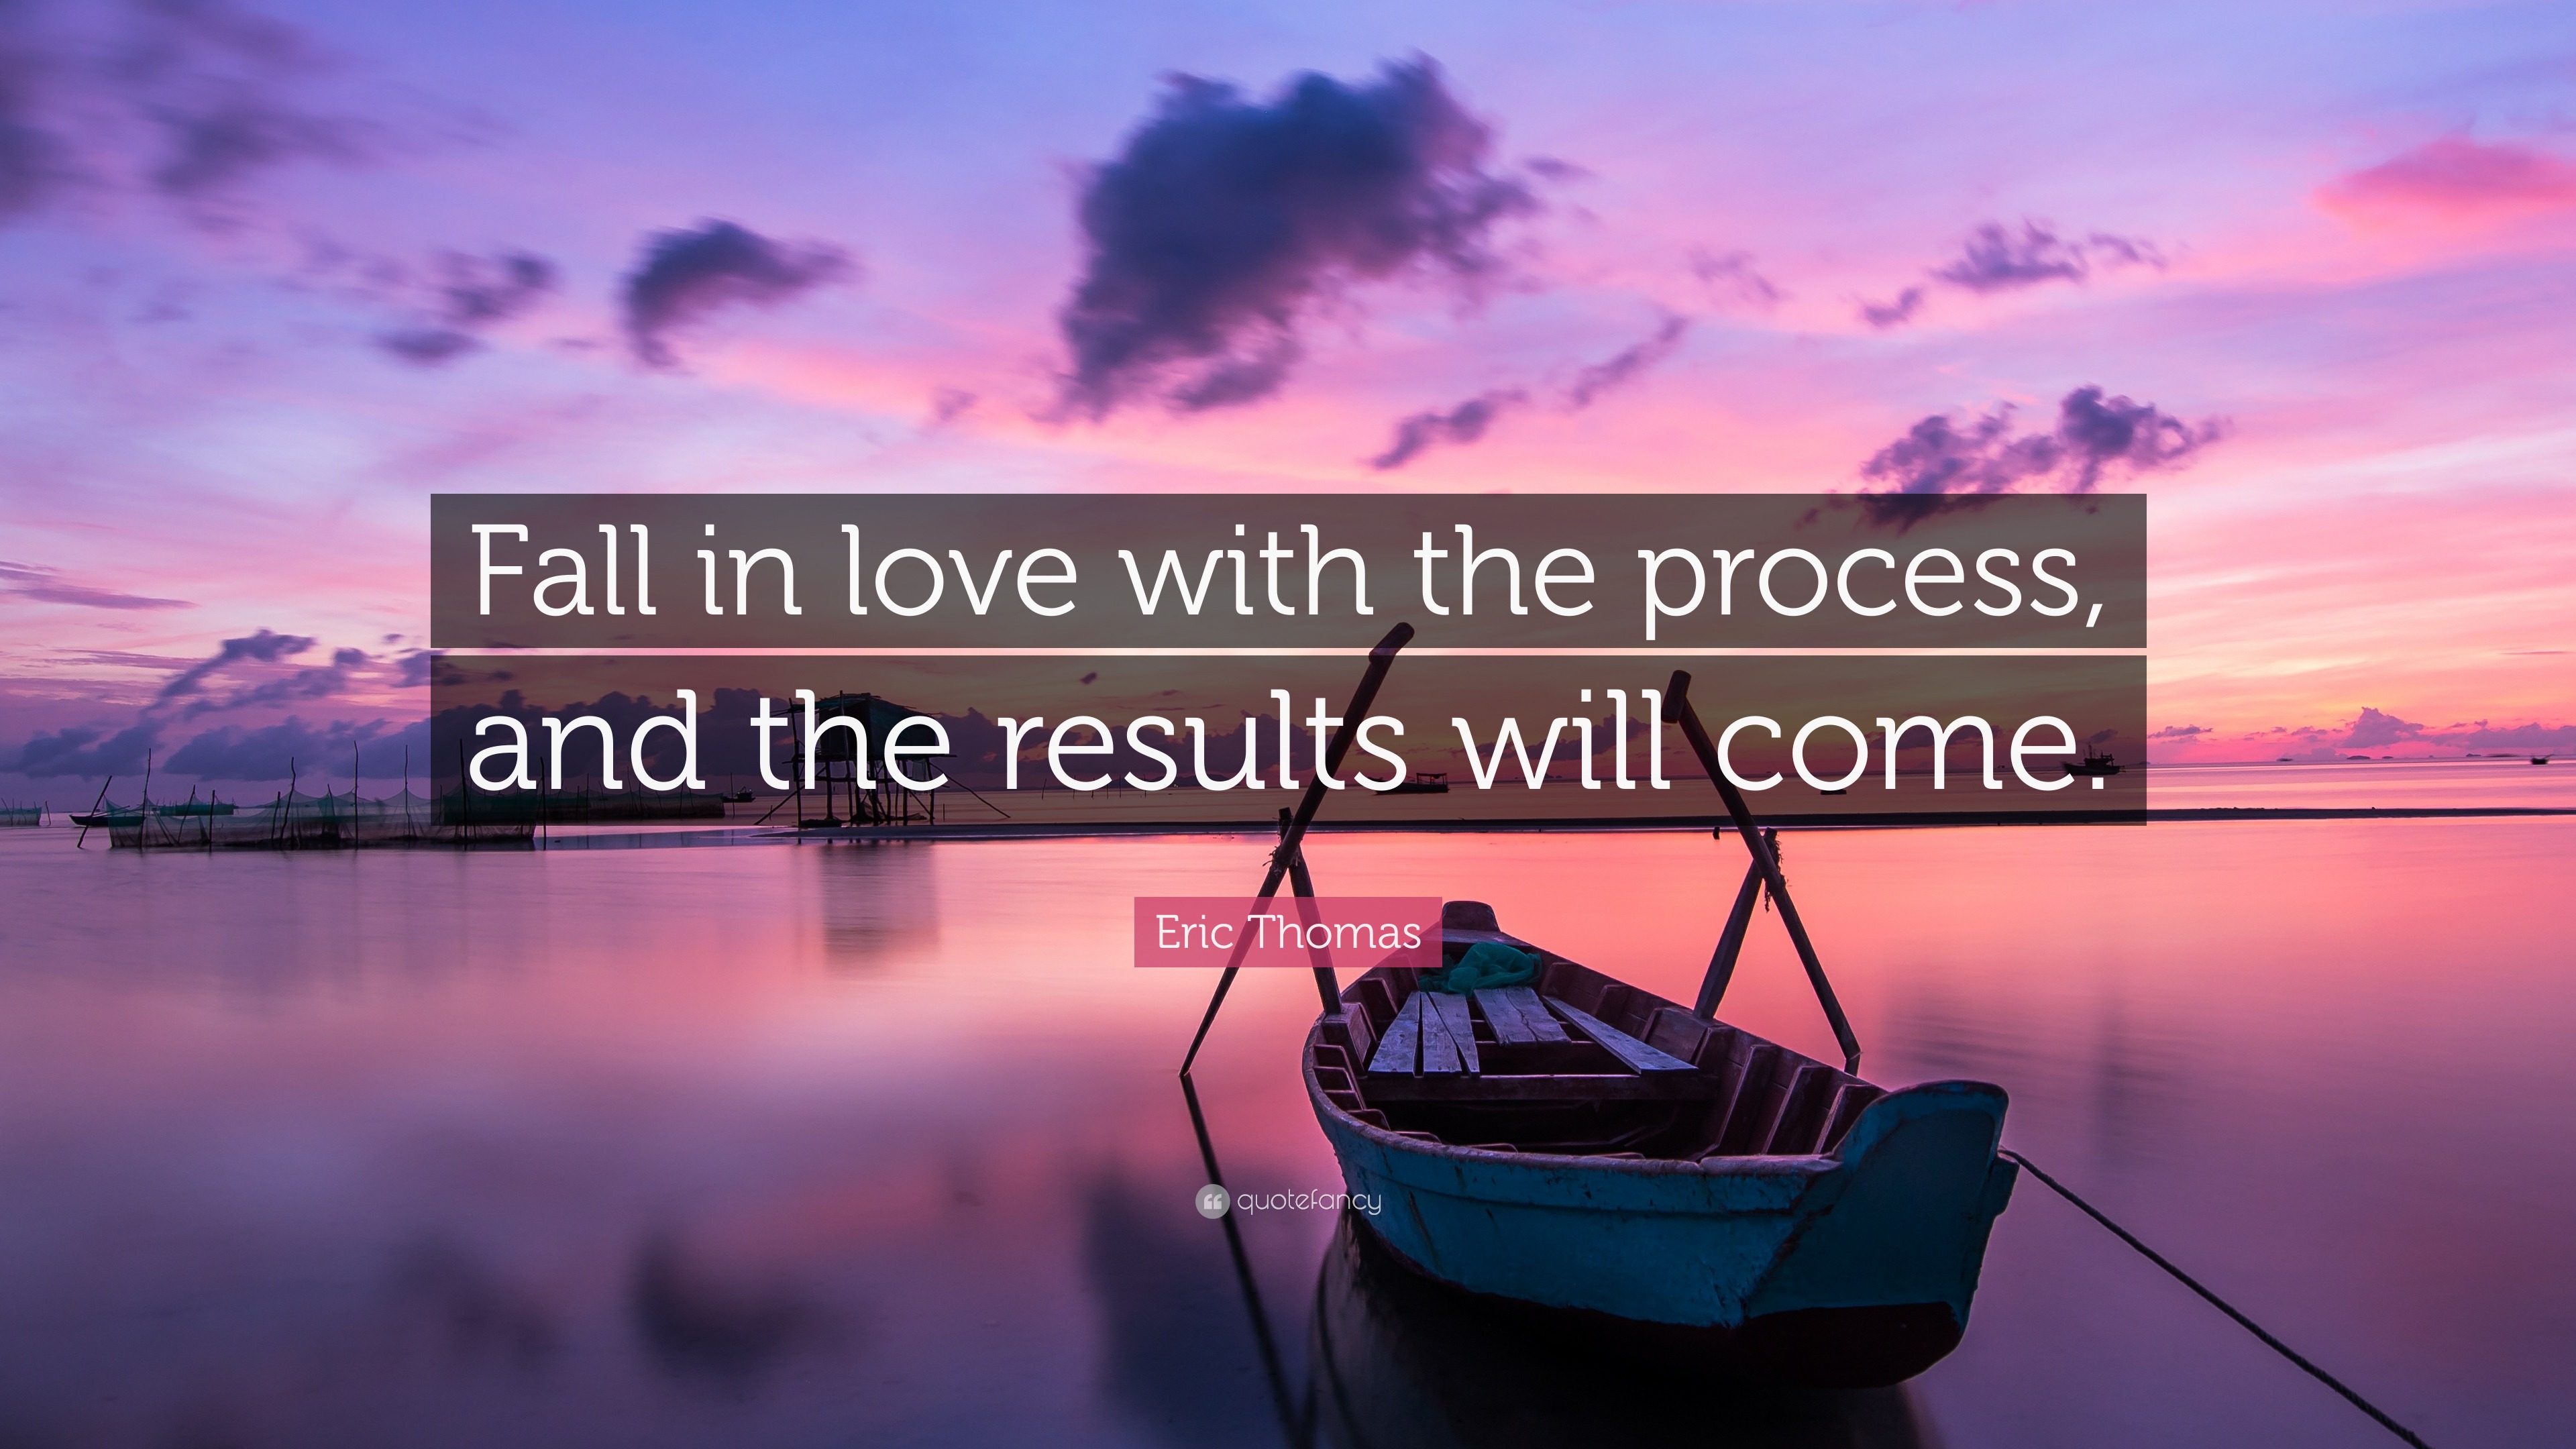 Eric Thomas Quote: “Fall in love with the process, and the results will